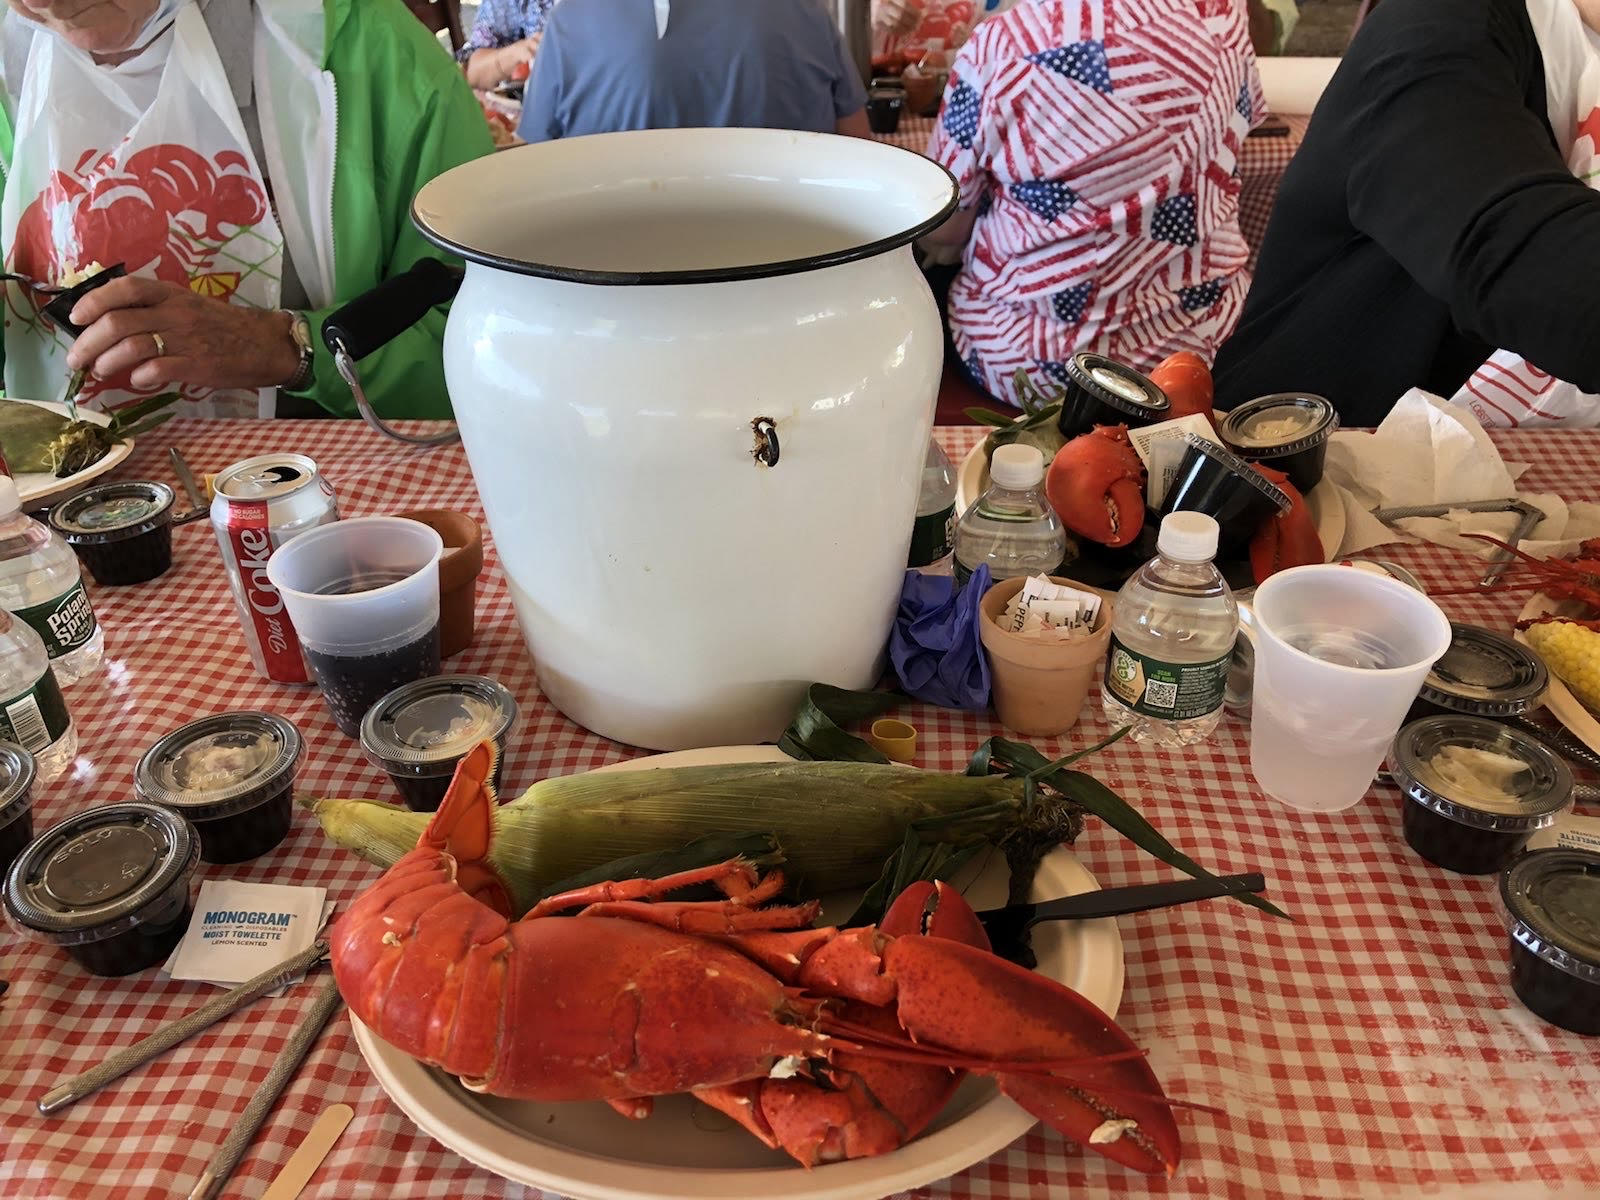 Lobster Bake at 'Sail, Power and Steam' Museum